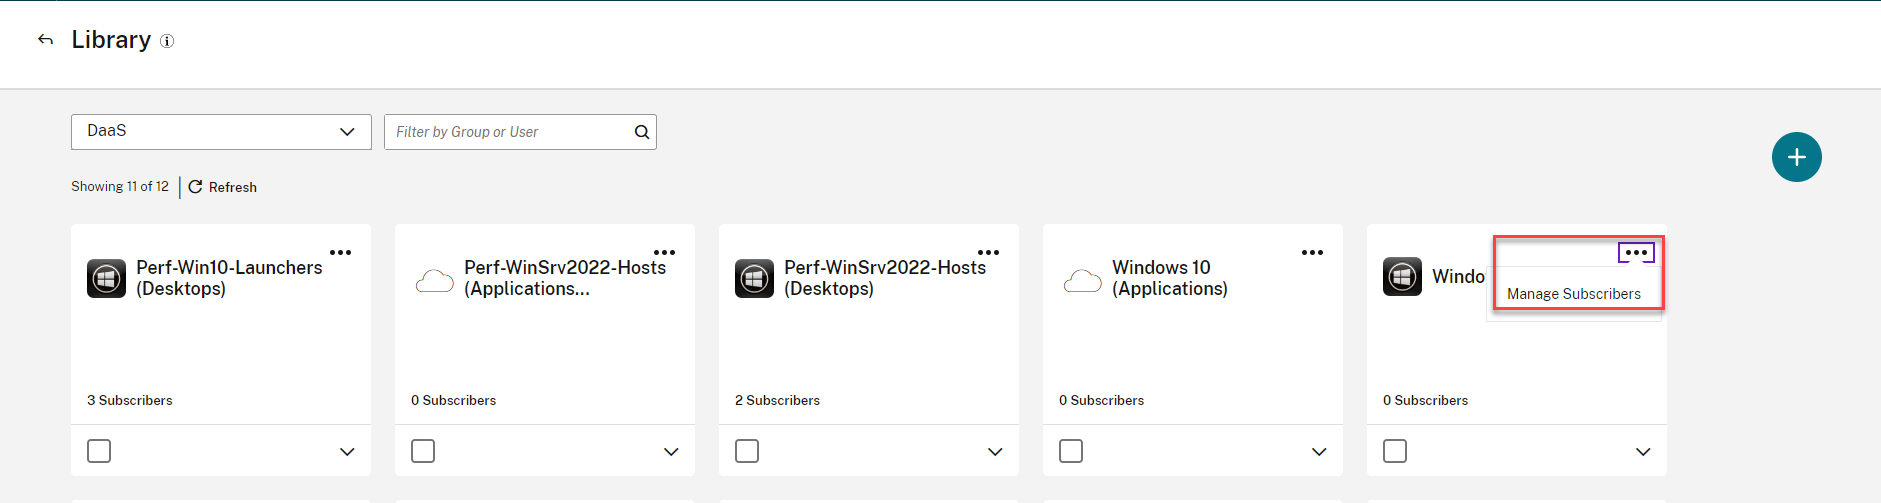 Citrix Virtual Apps and Desktops Manage Subscribers